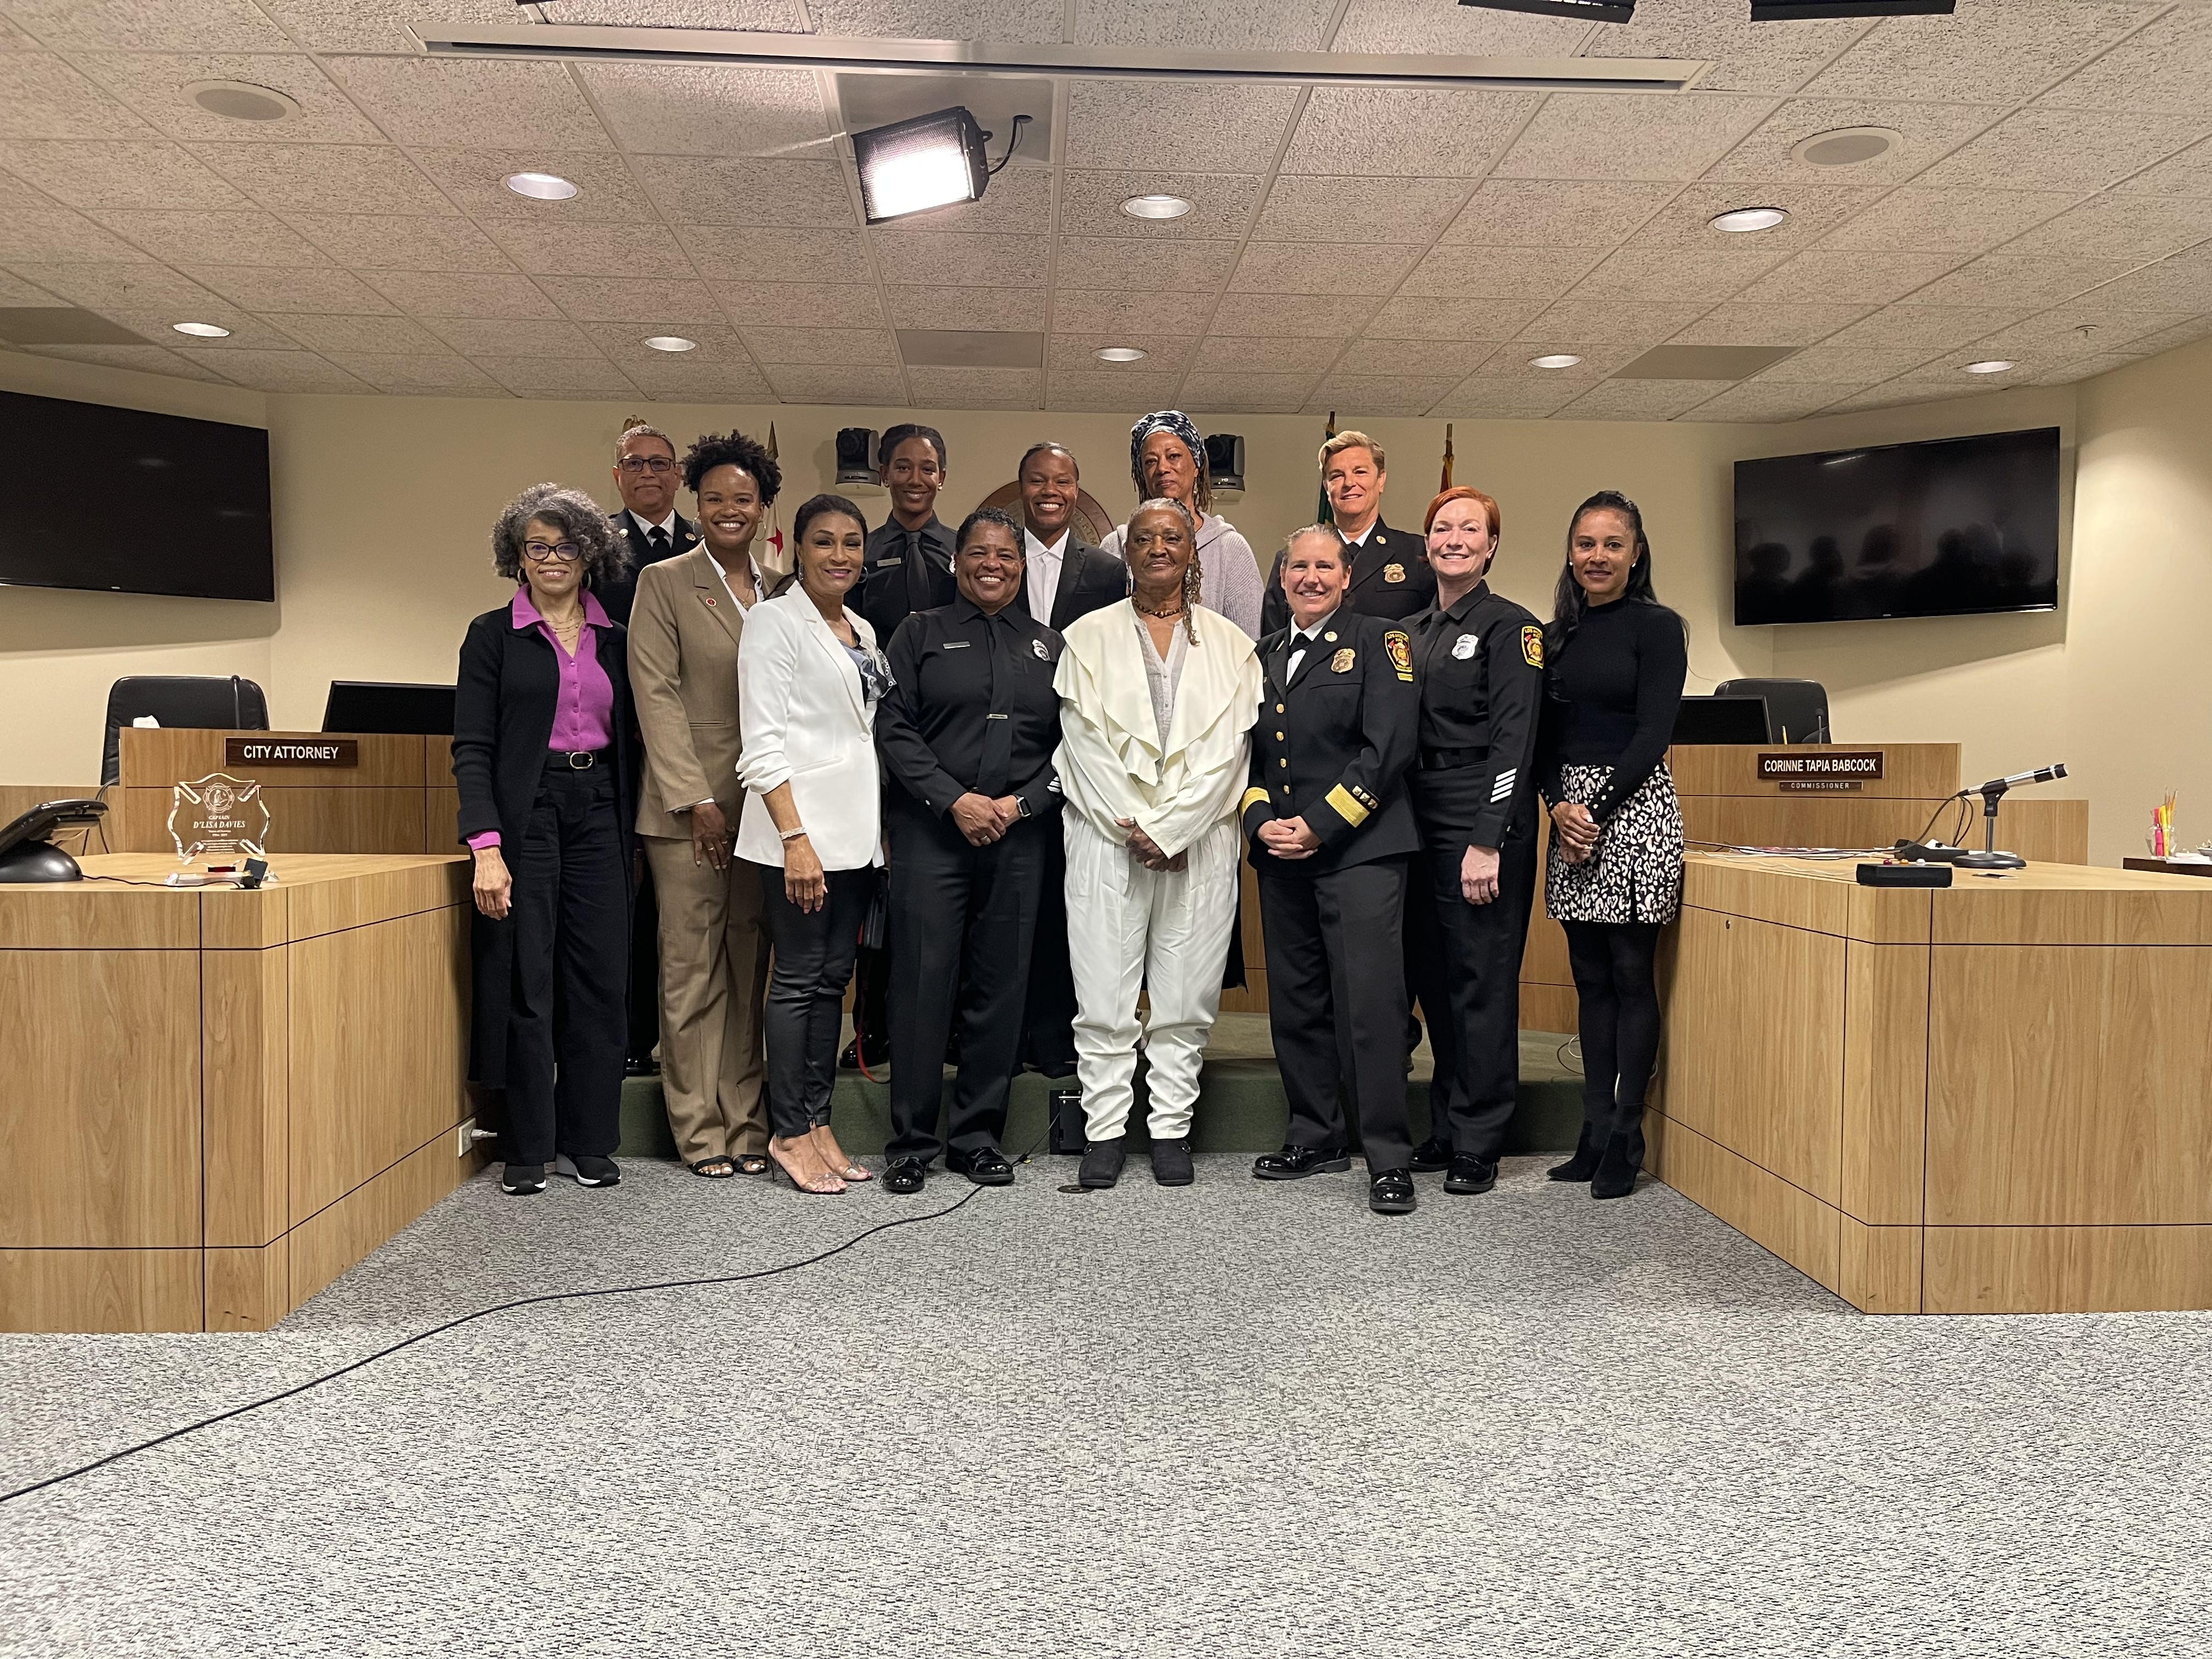 Group shot of d'Lisa Davies and others at the Commission meeting, including Chief Crowley